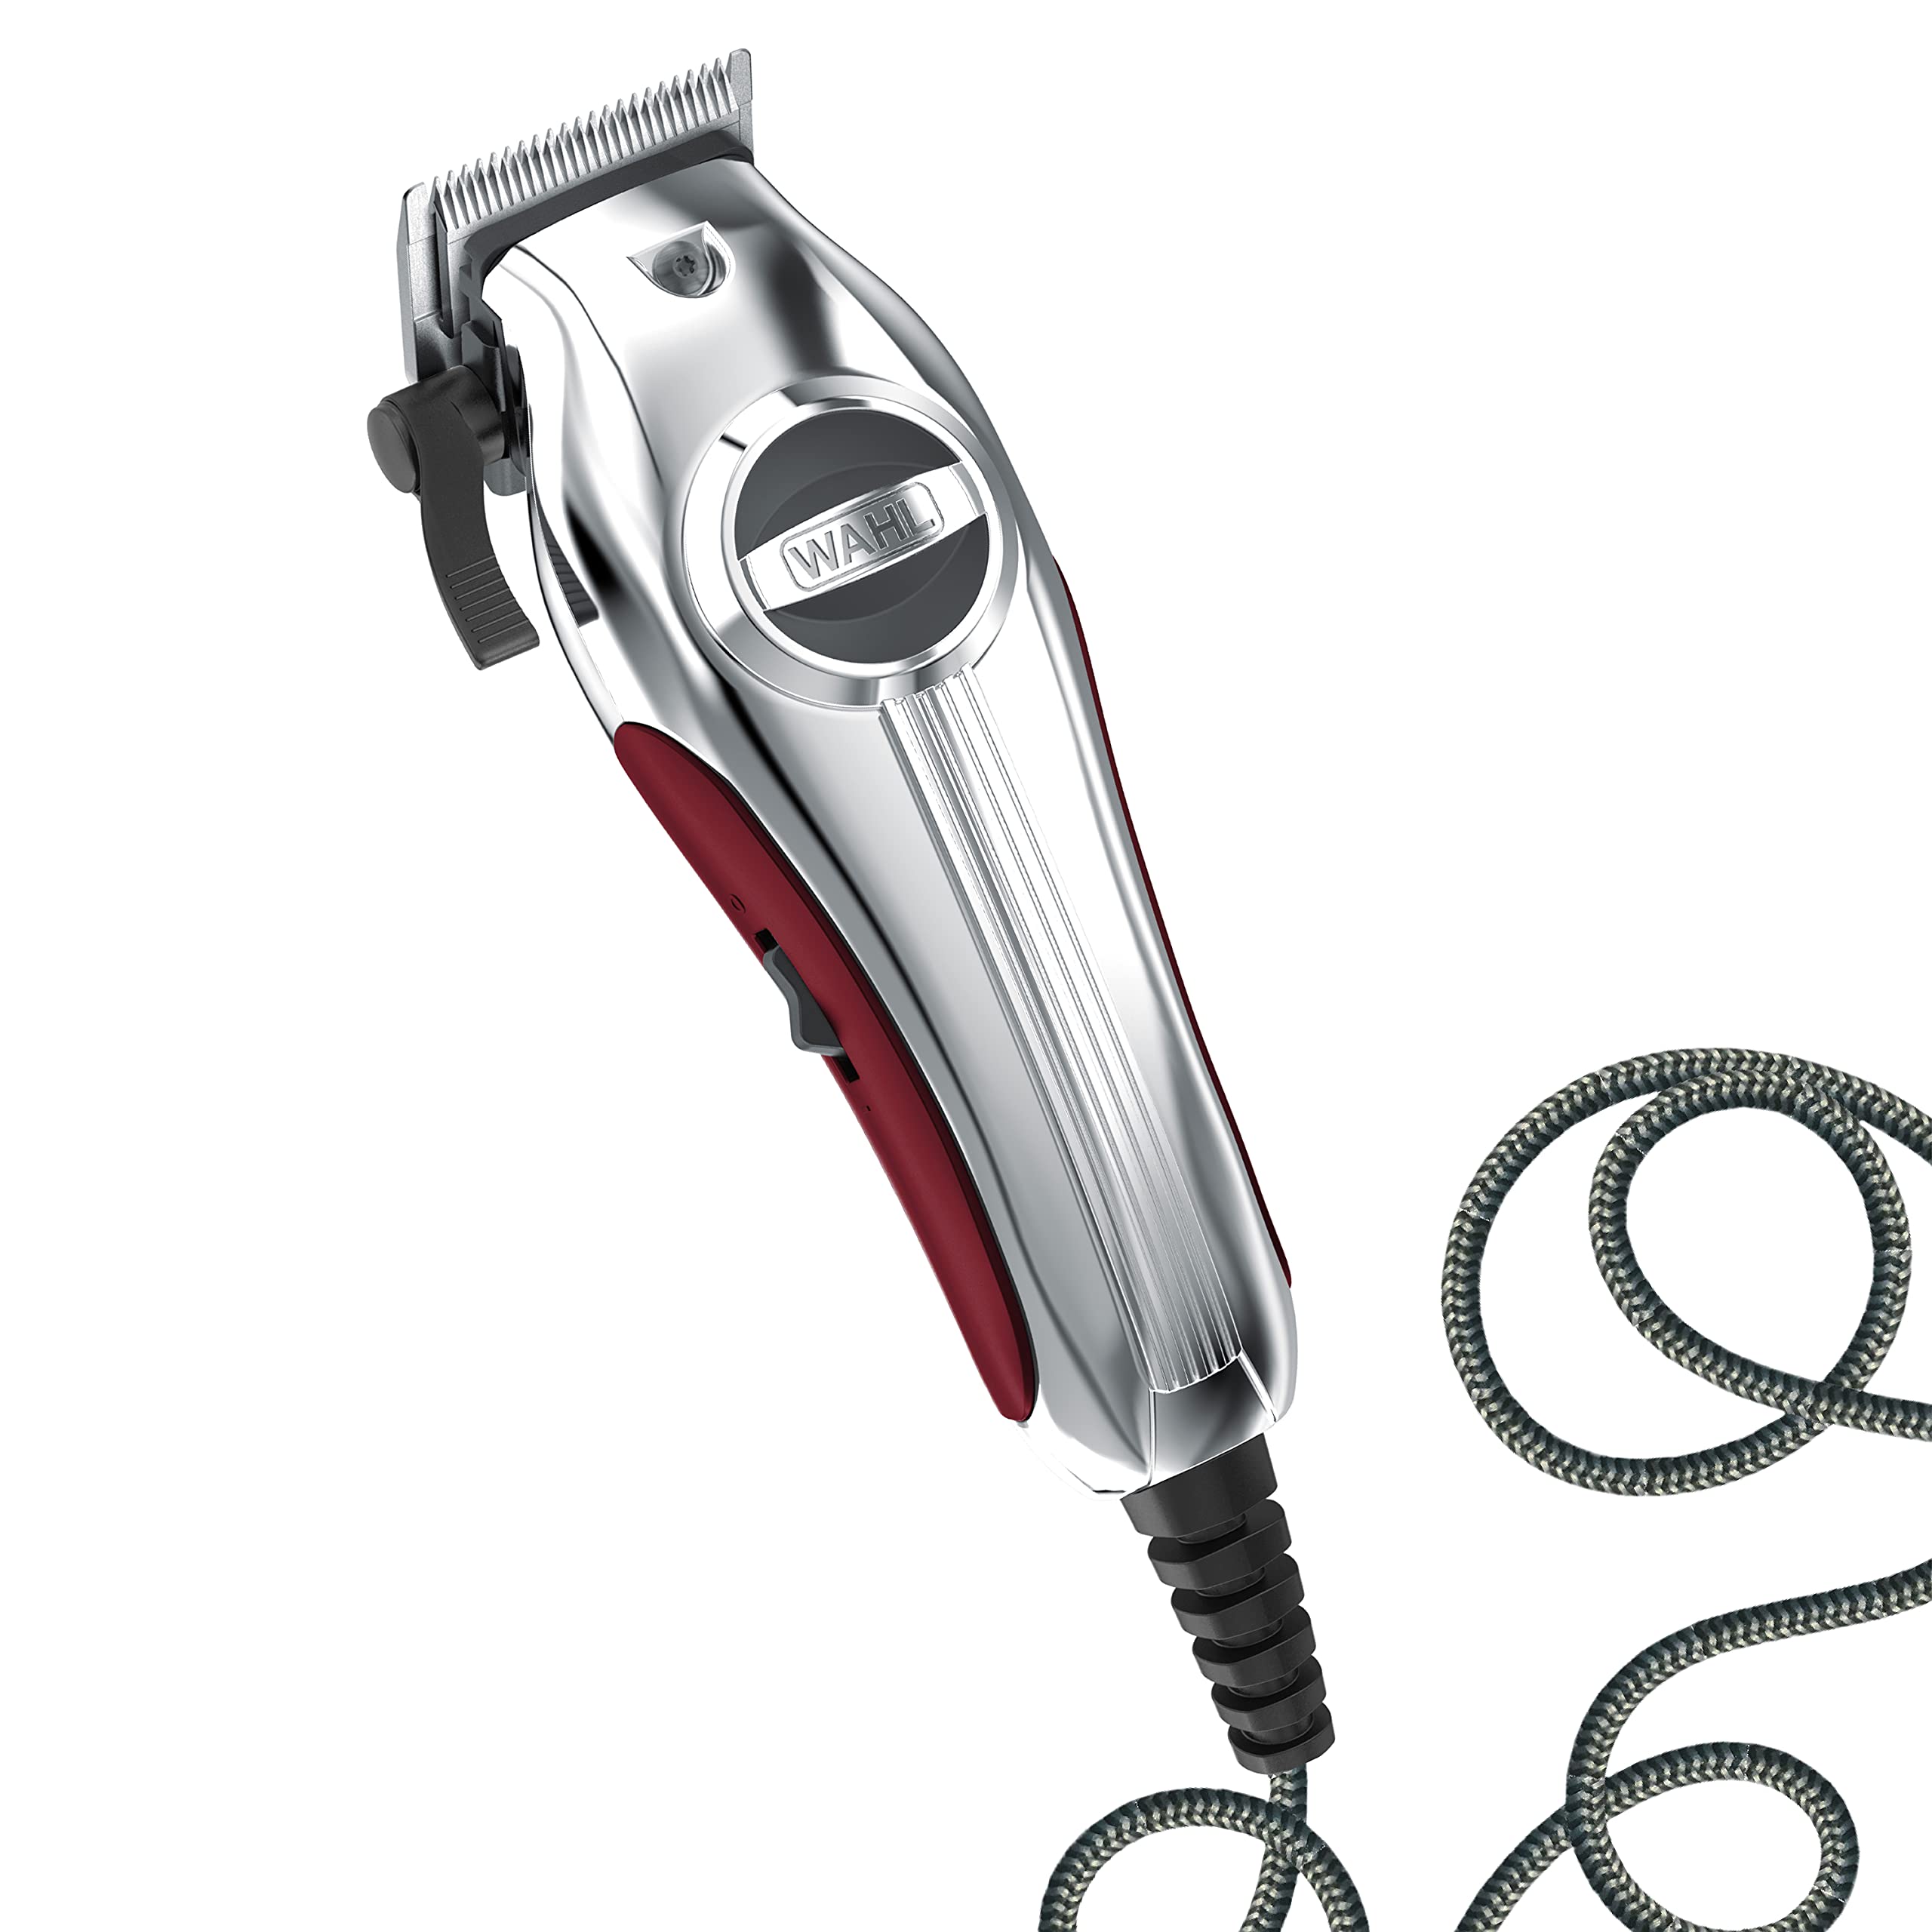 Wahl USA Metal Corded Clipper Kit with Double Insulation for Ultra Quiet Operation and Cooler Operating Temperatures, Metal Housing with Bonus Hair Clipping Guard Caddy - Model 3000097